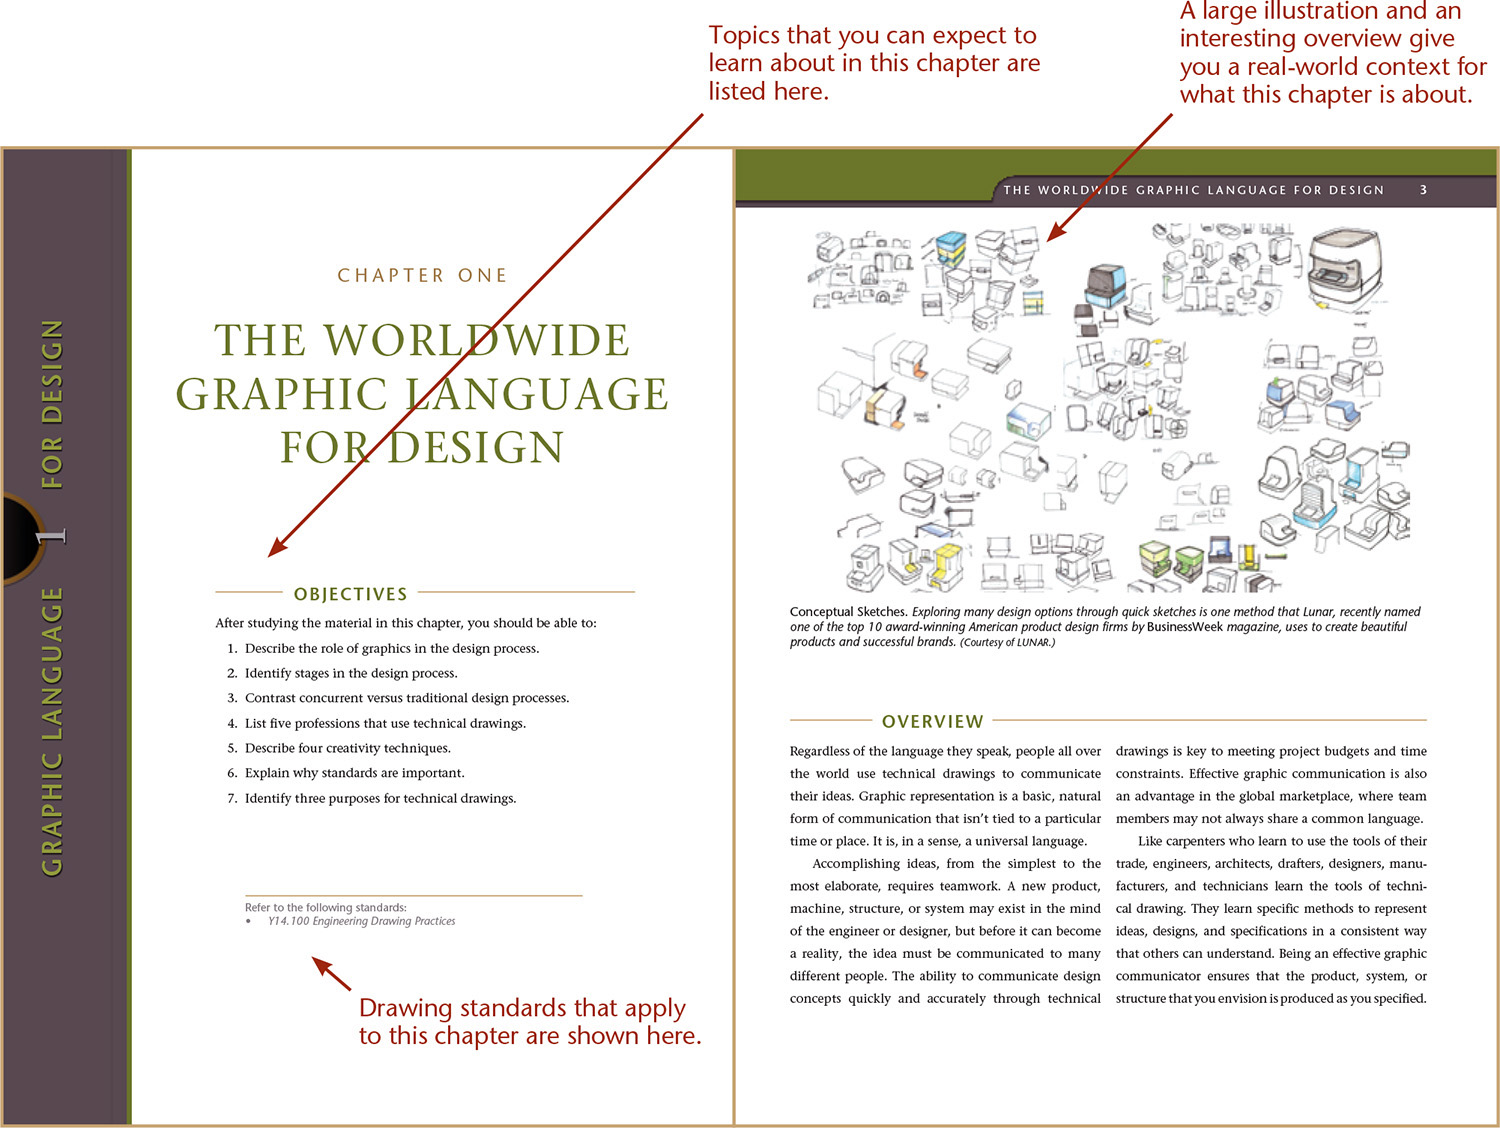 Chapter one opener with two spreads titled The worldwide graphic language for design is shown.